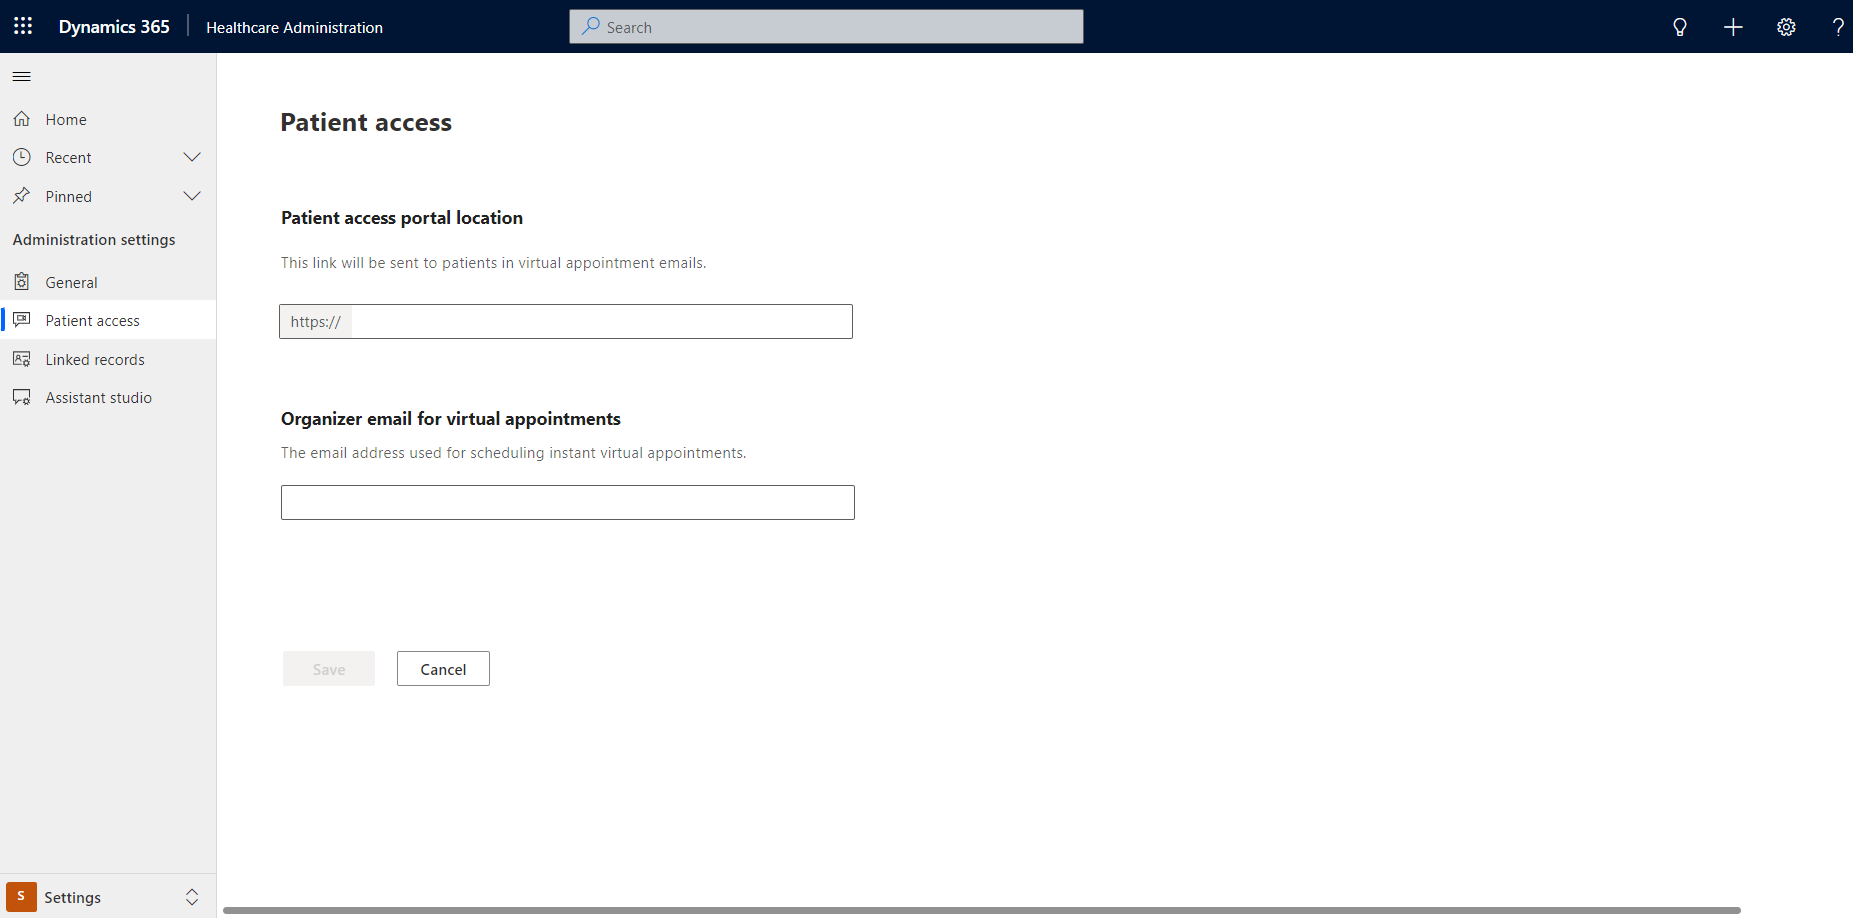 A screenshot showing the administration settings page.